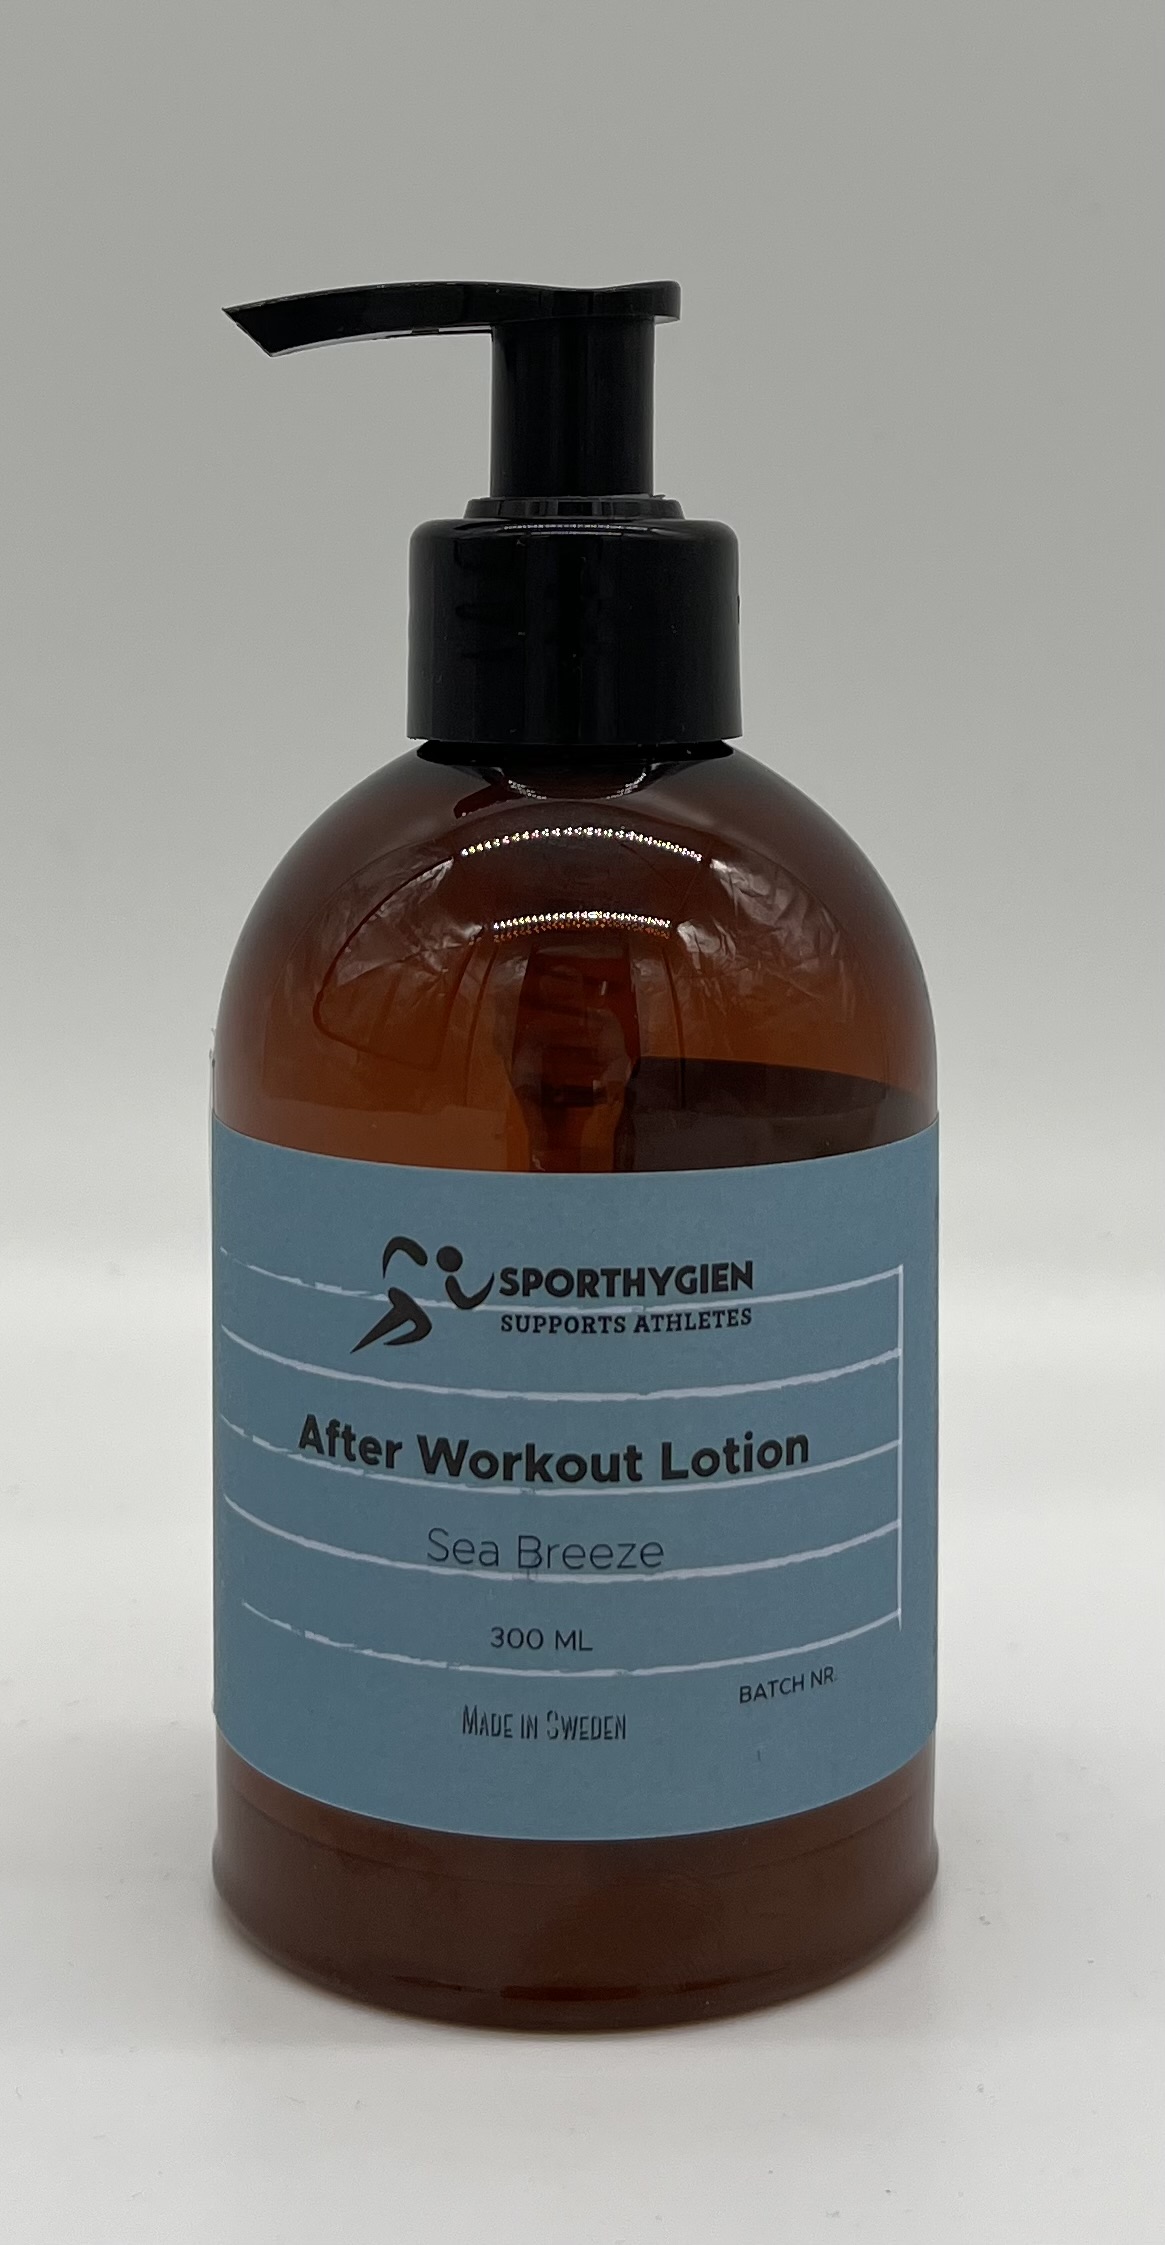 After Workout Lotion Sea Breeze 300 ml.